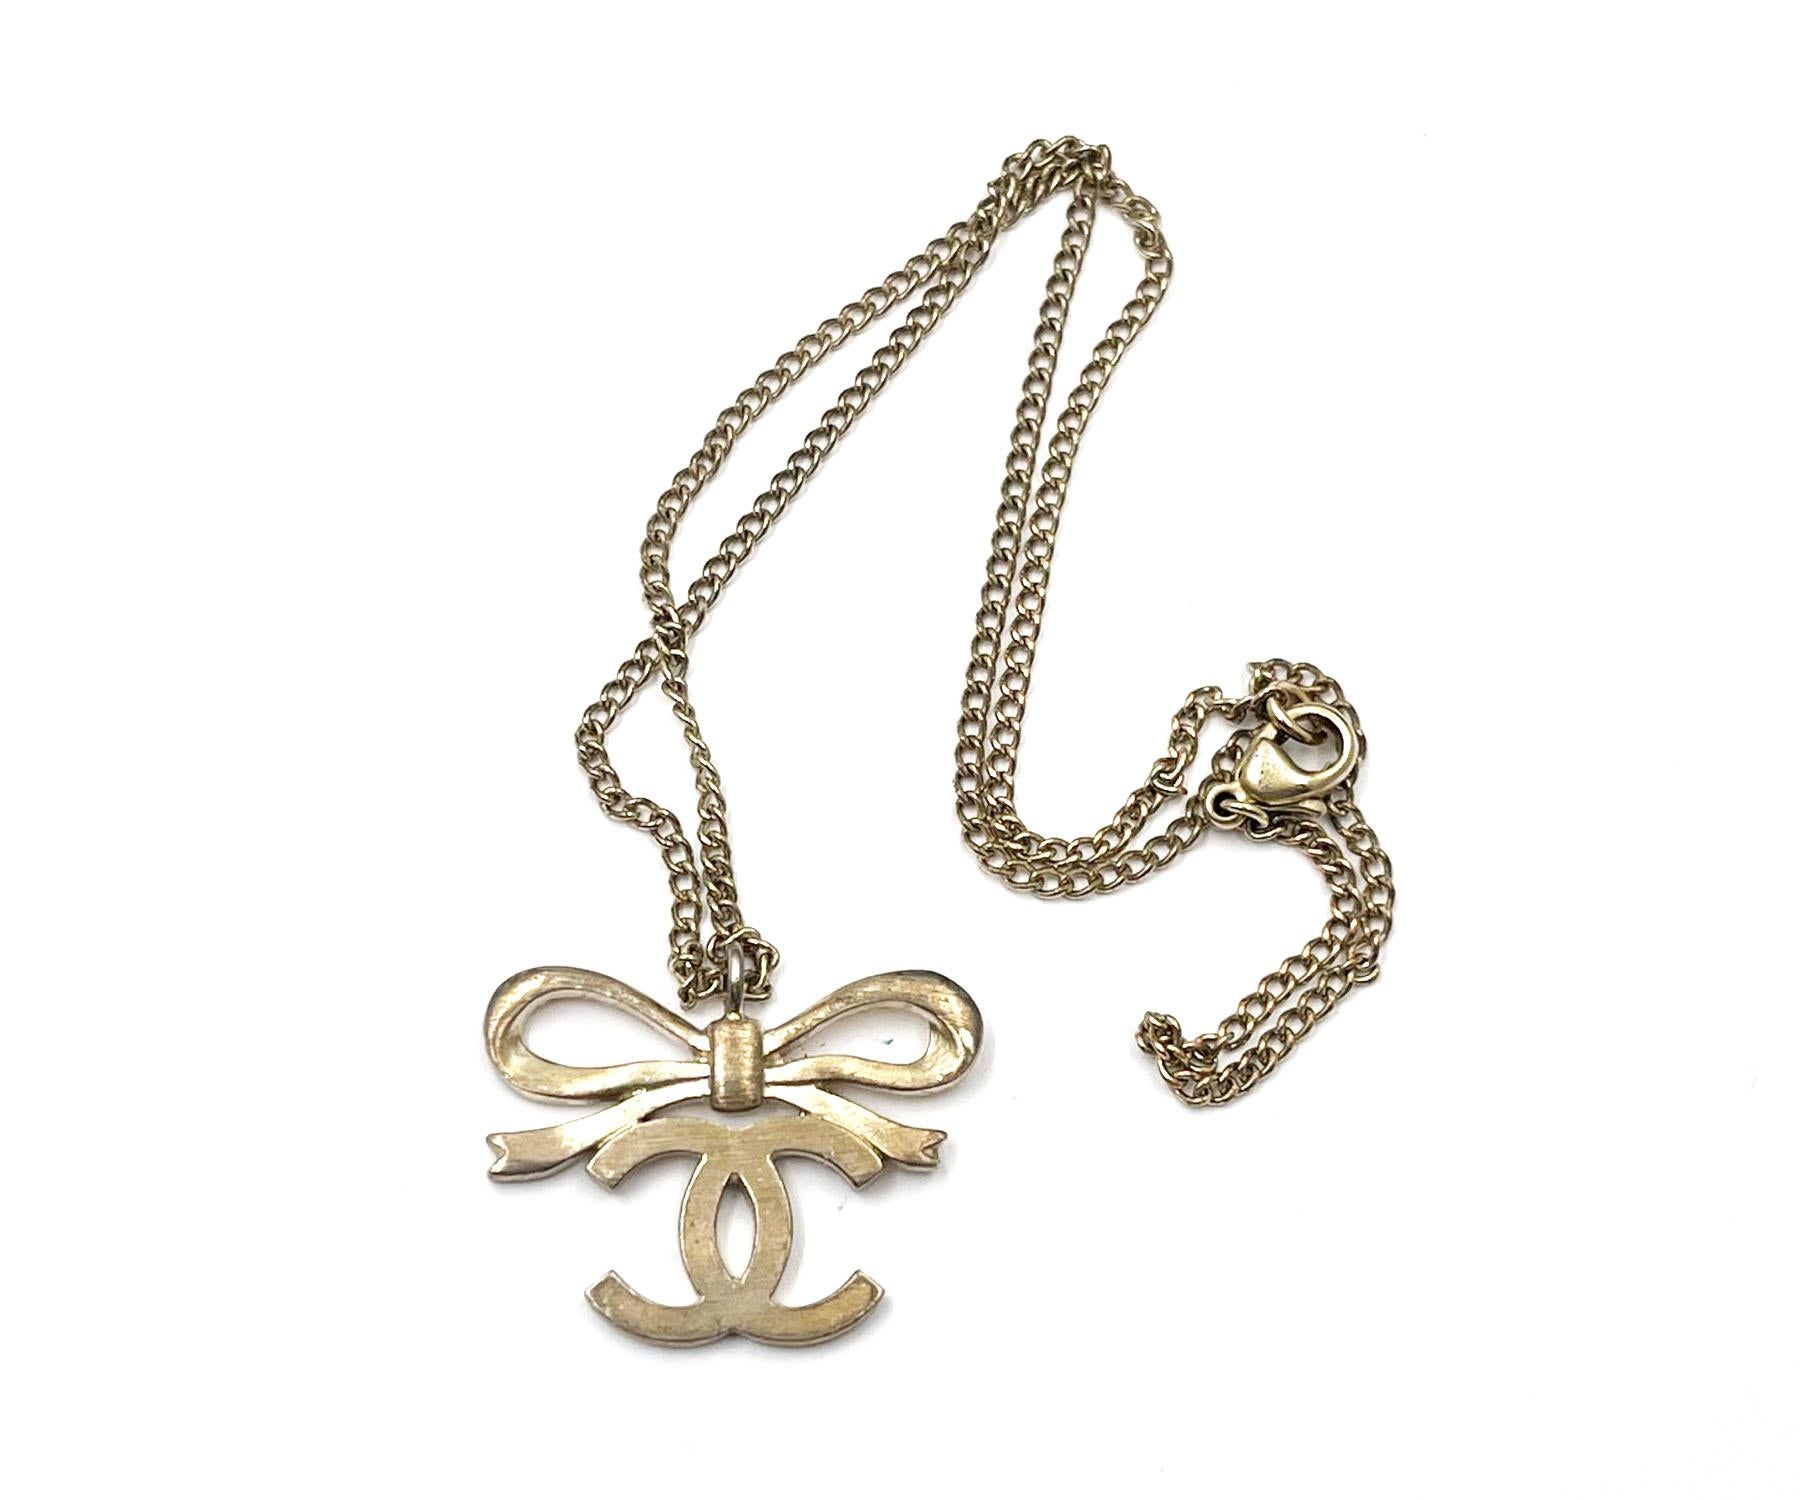 Chanel Light Gold Ribbon Bow CC Necklace

*Marked 05
*Made in France

-Chain is approximately 16